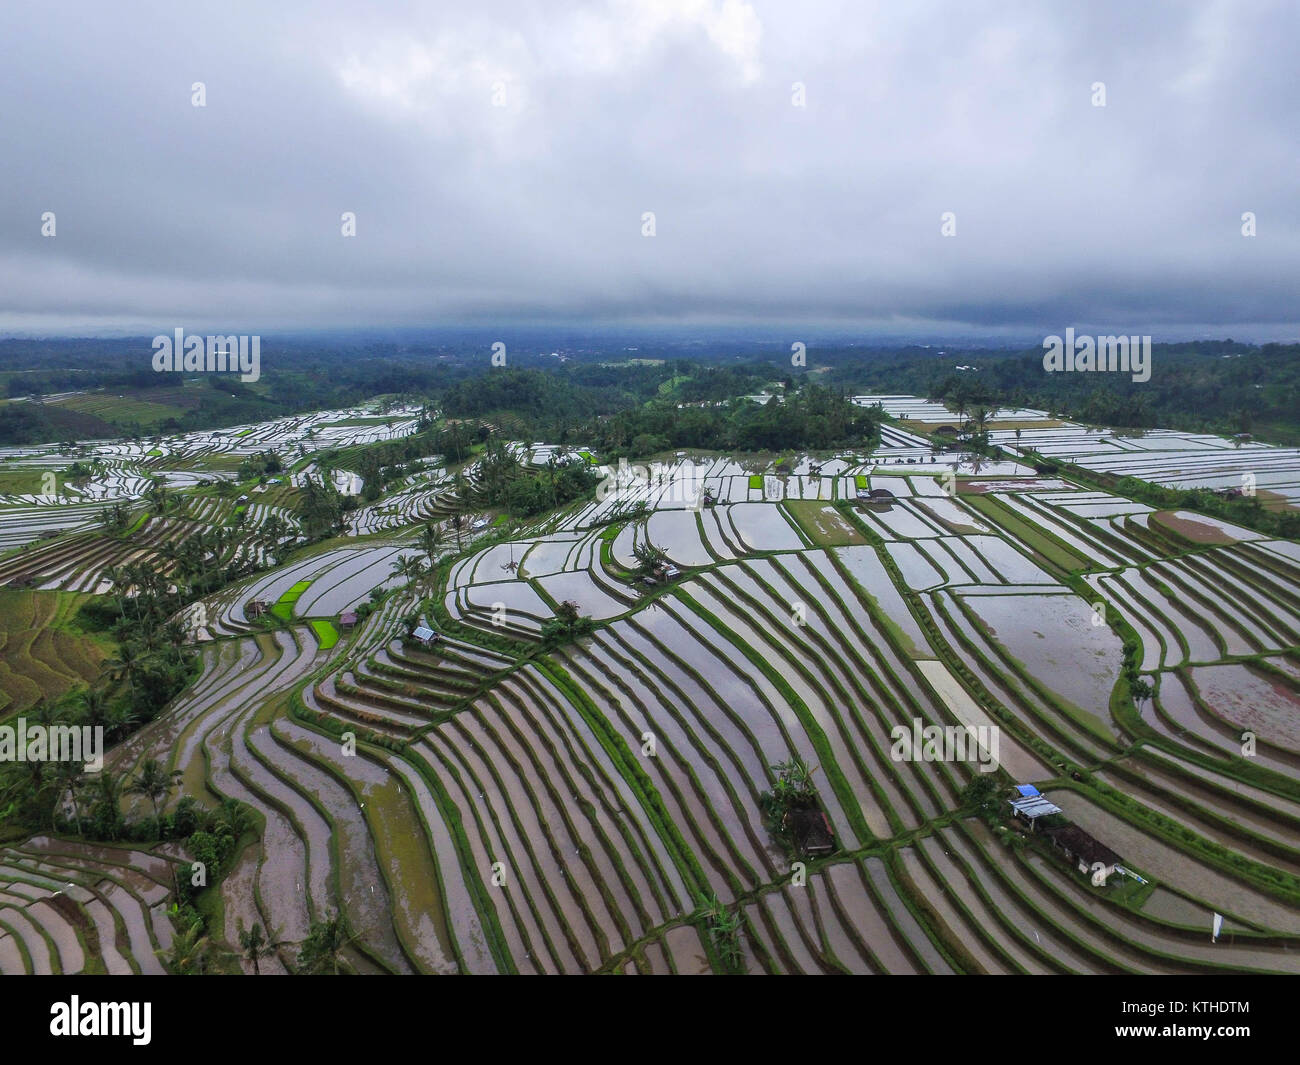 Jatiluwih rice terrace during planting season. The rice field are ready to be planted with rice seeds and usually happen in wet season. Stock Photo